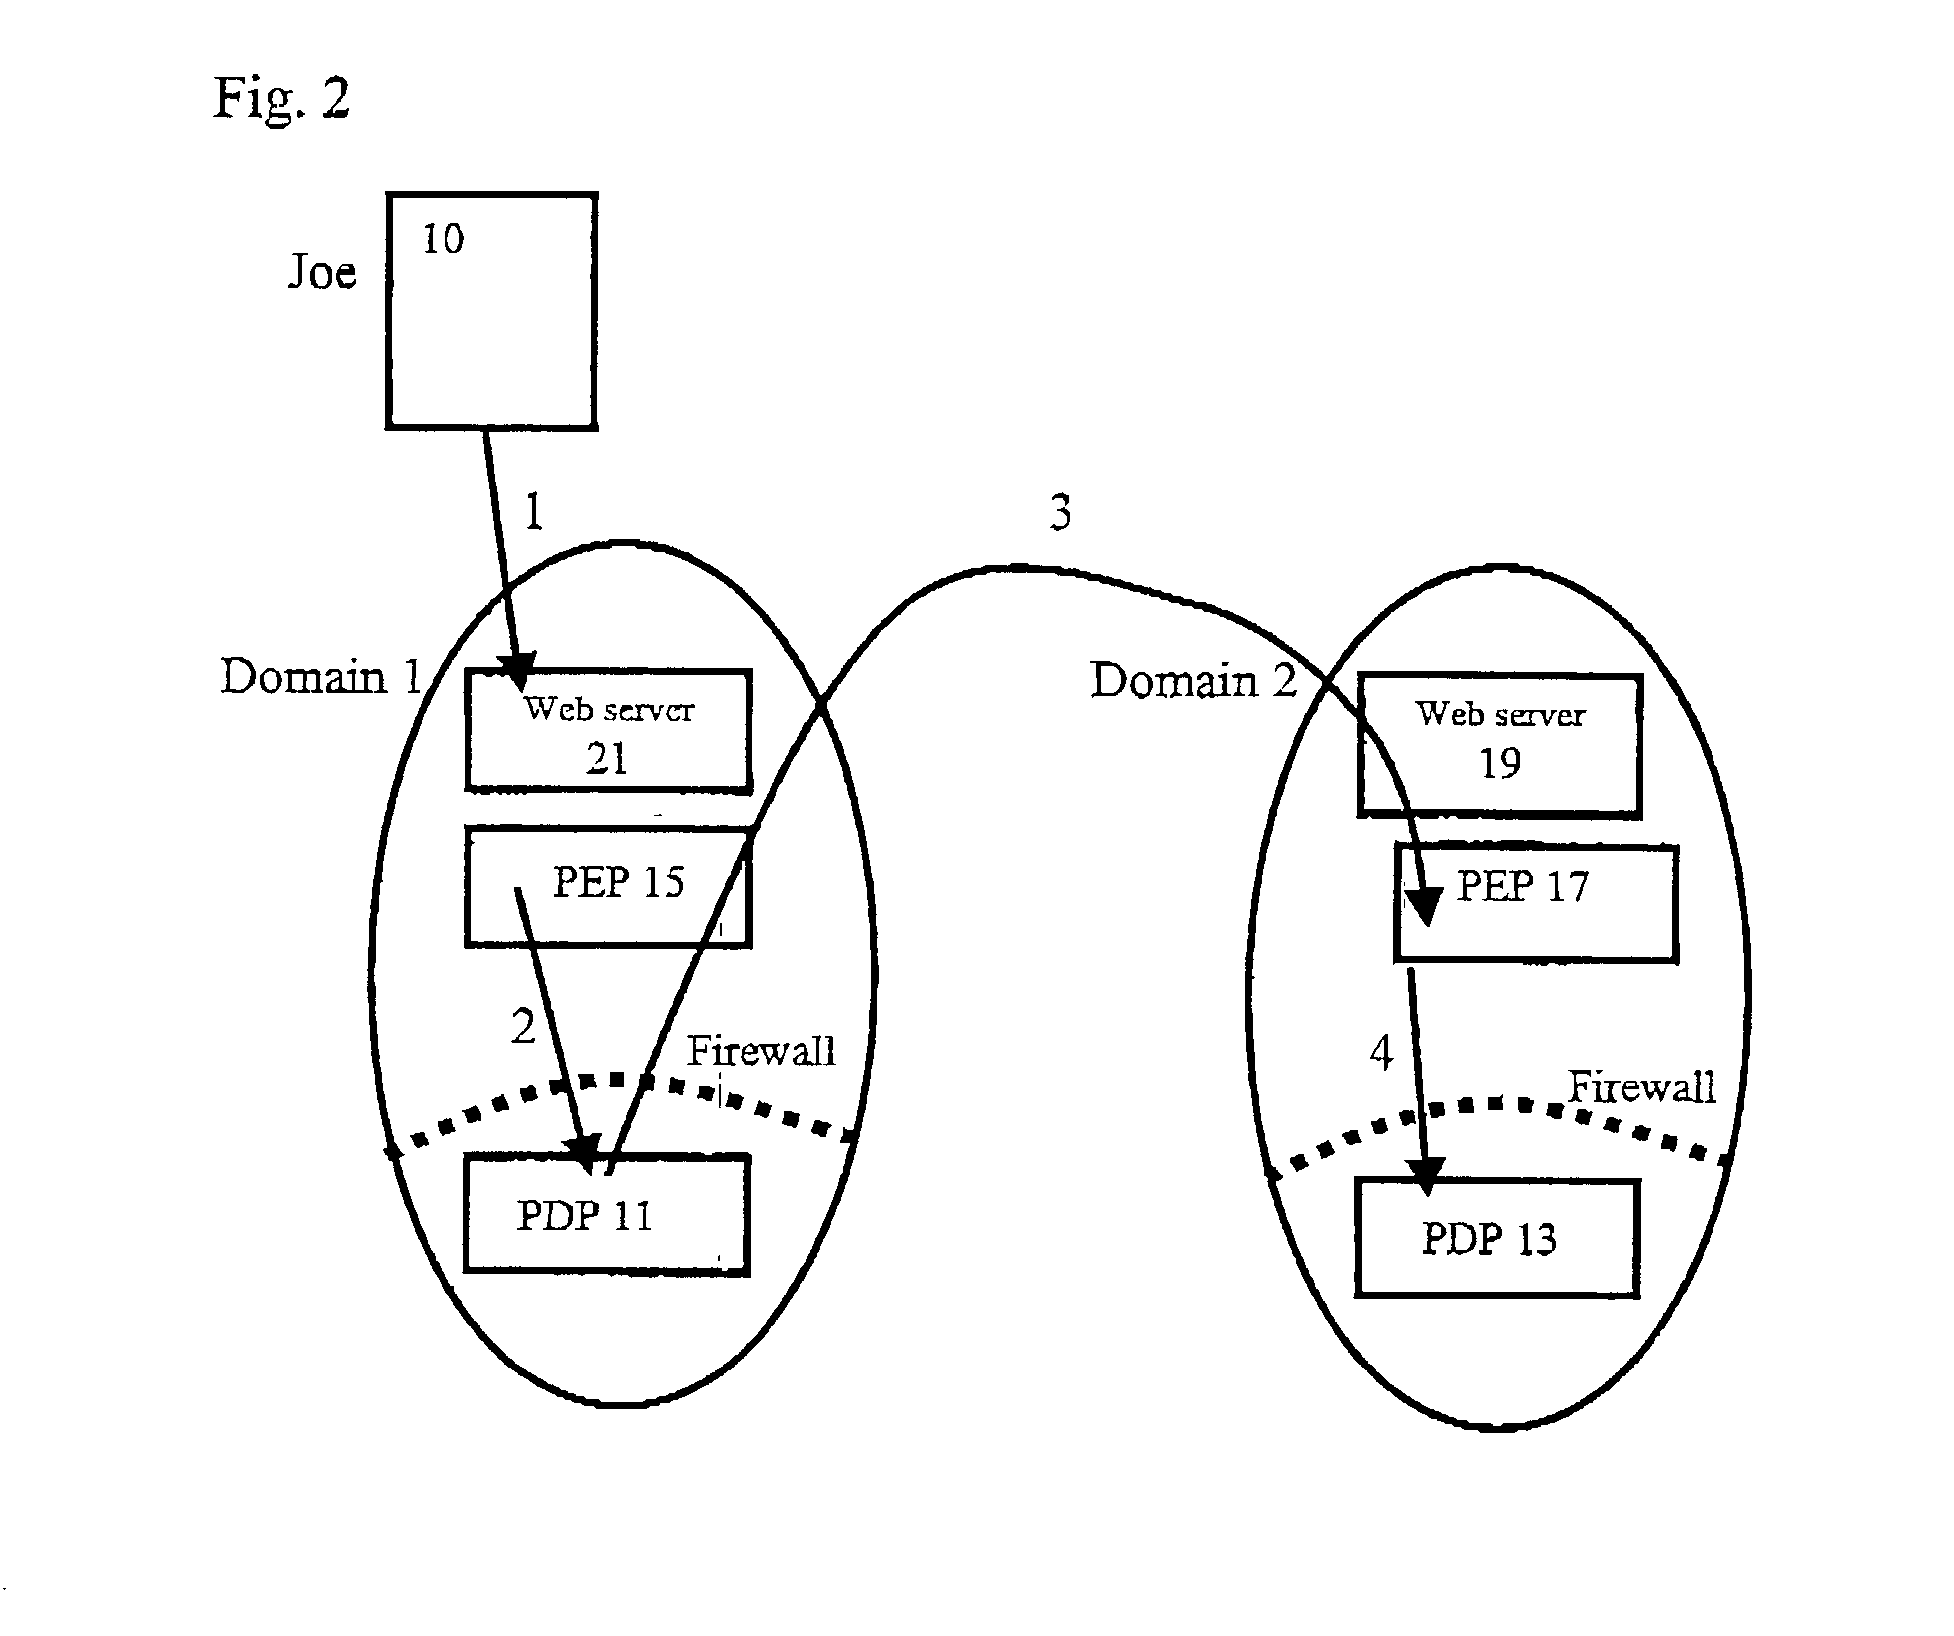 Multi-domain authorization and authentication